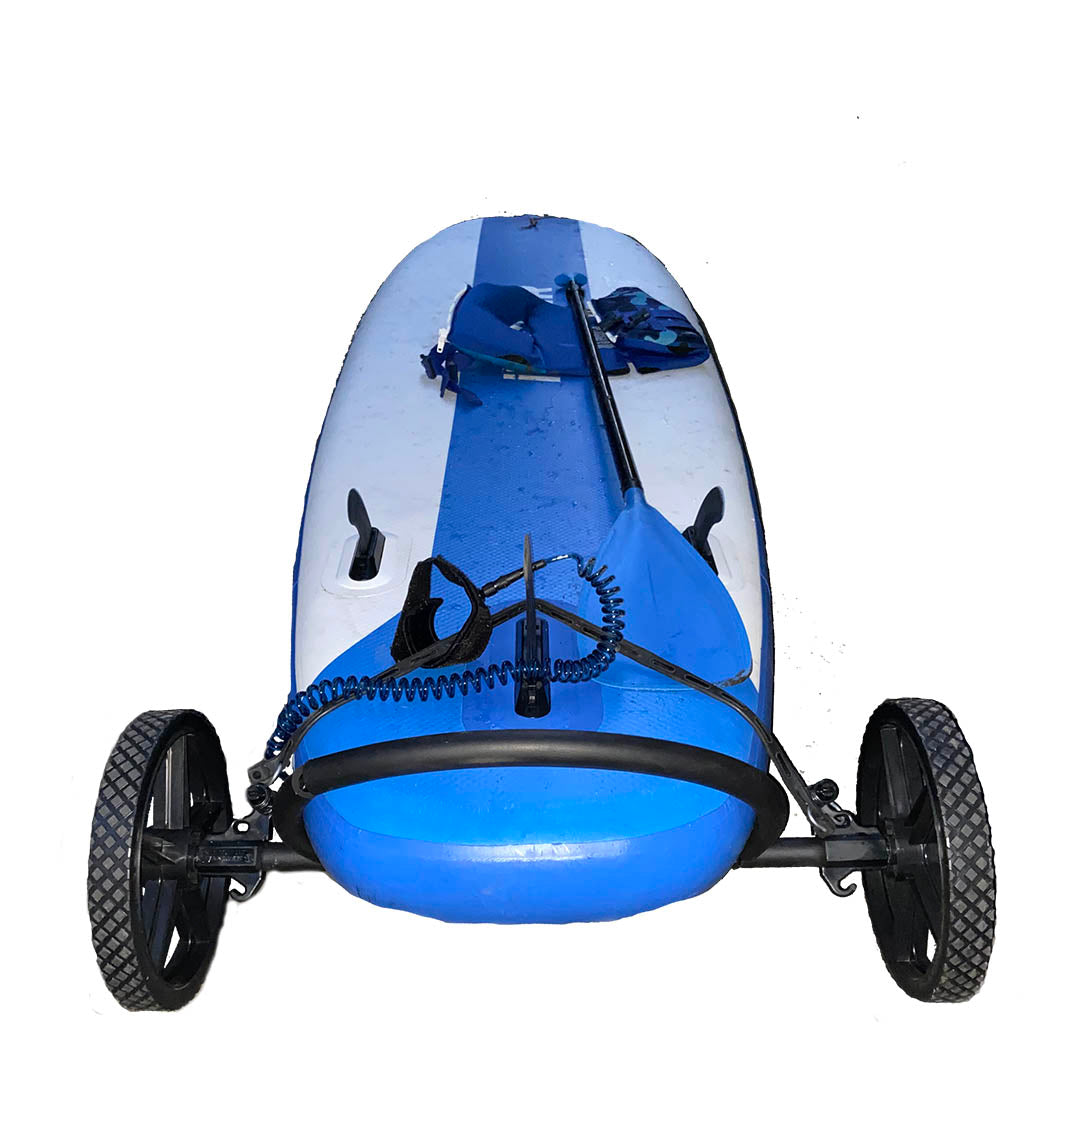 SUP Wheels new product for inflatable paddle boards